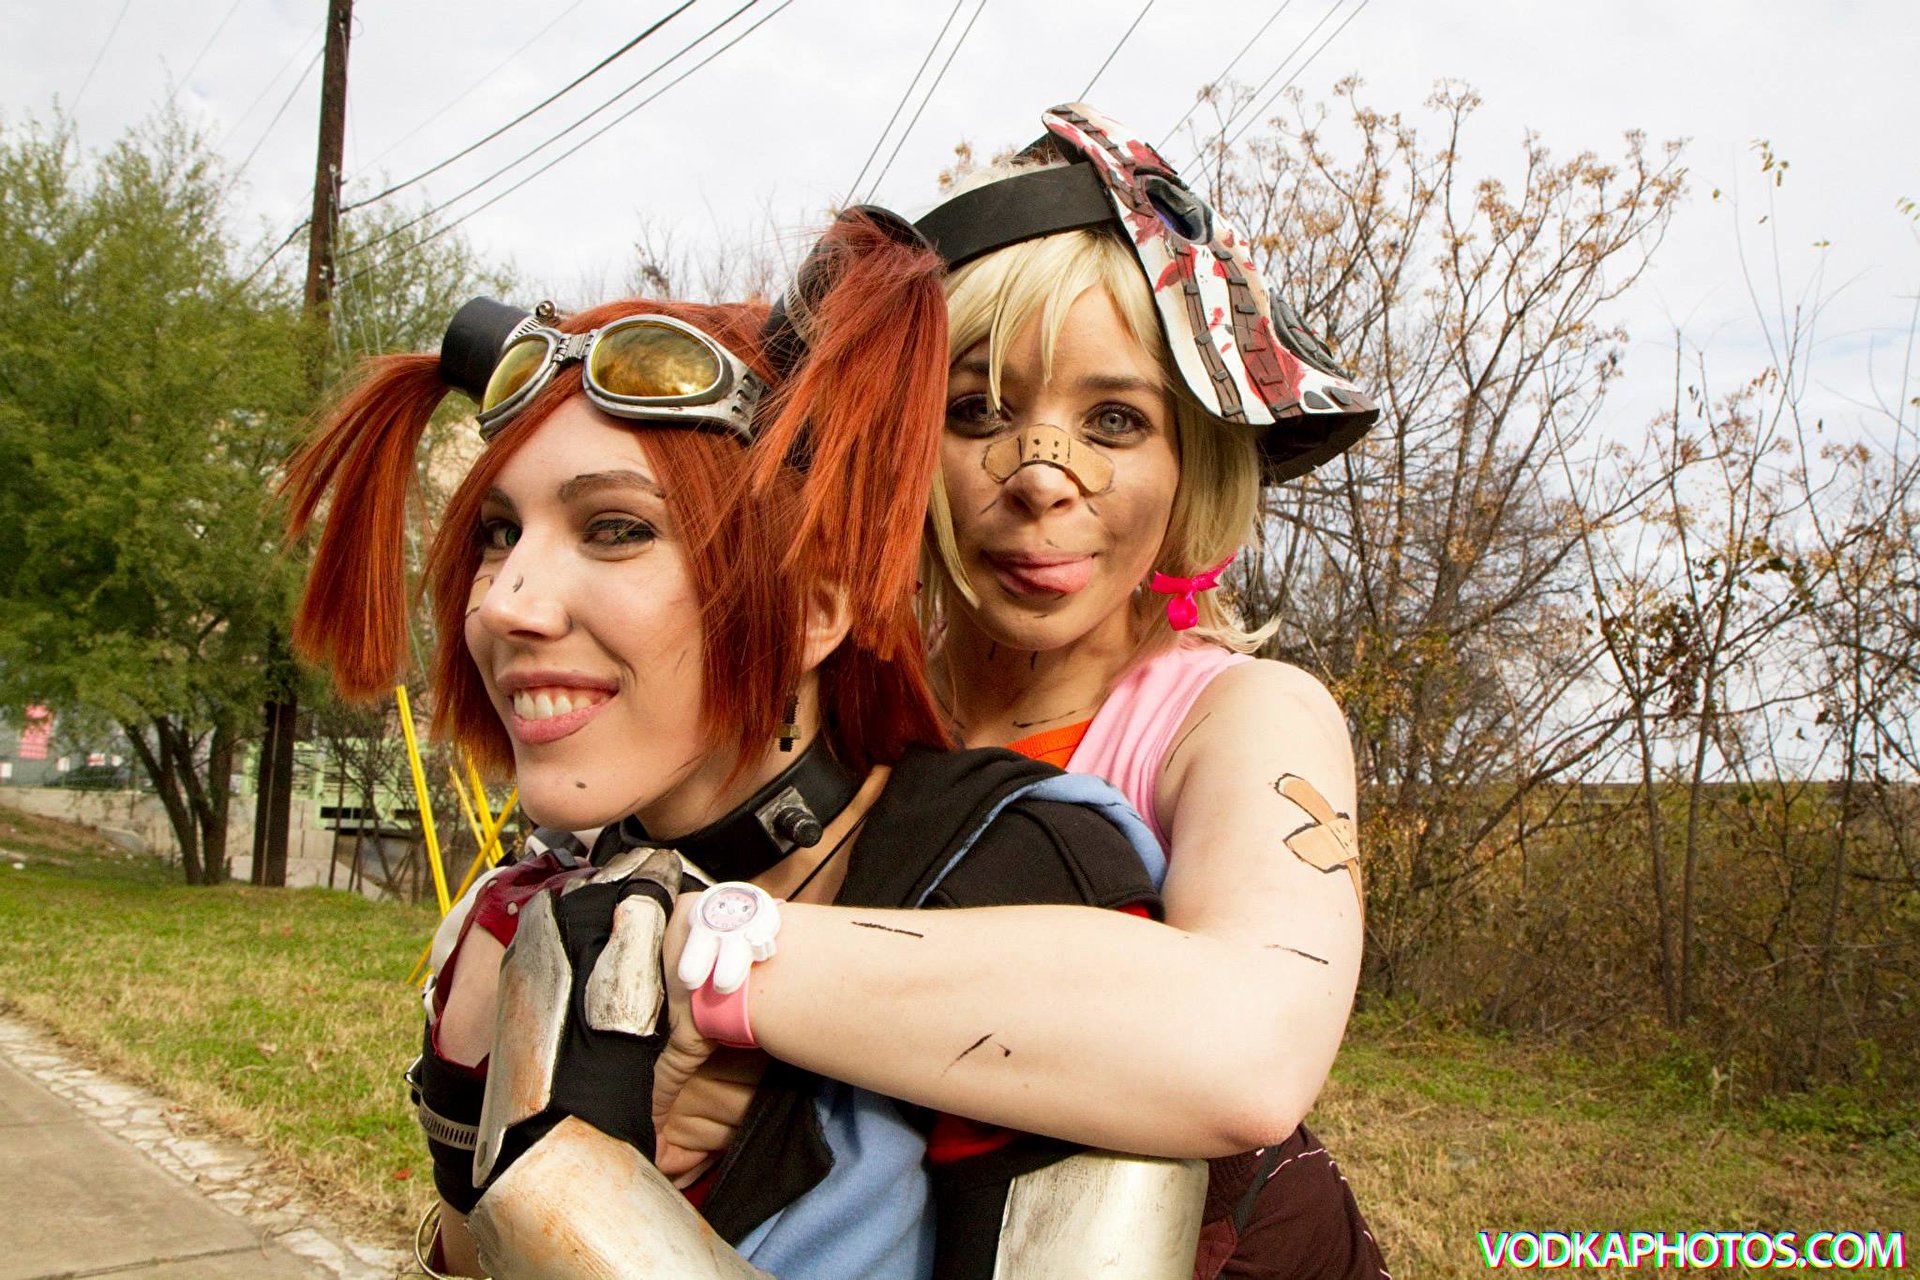 Cospix.net photo featuring Viverra Cosplay and Ayriath